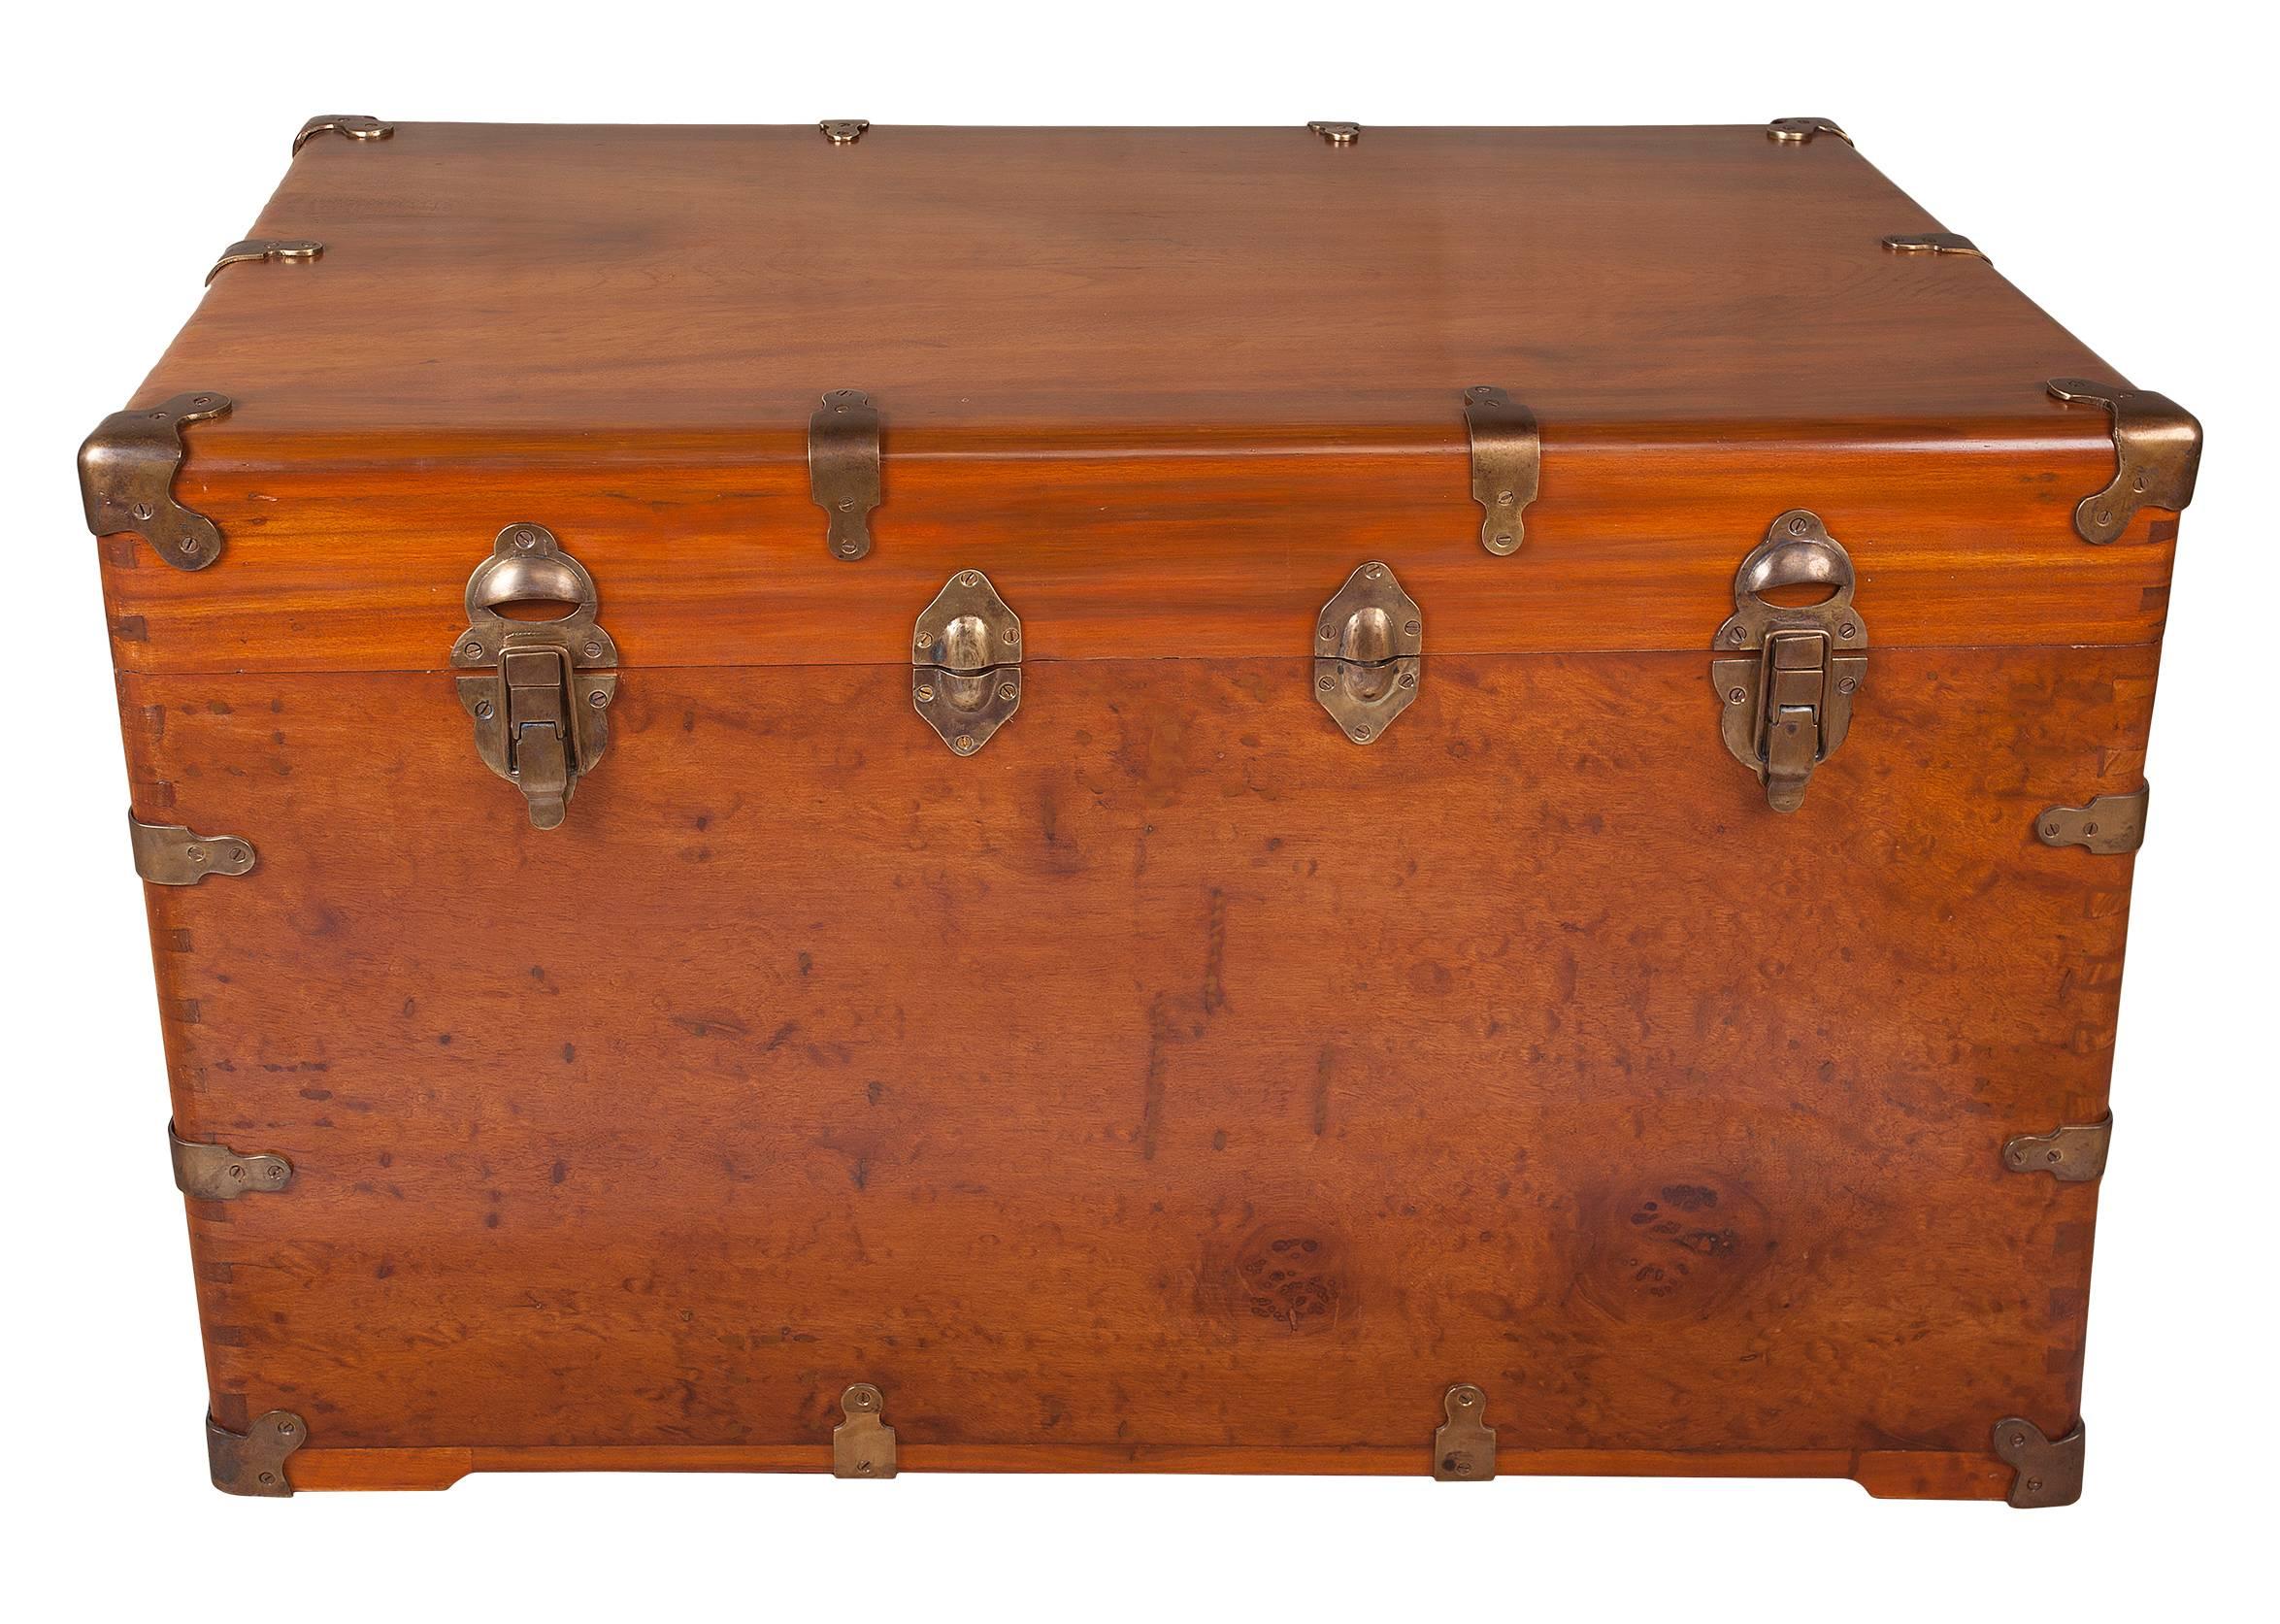 Handsome camphor wood sea chest with original brass hardware. Great dovetails and burl wood front, late 19th century, English. Refinished.